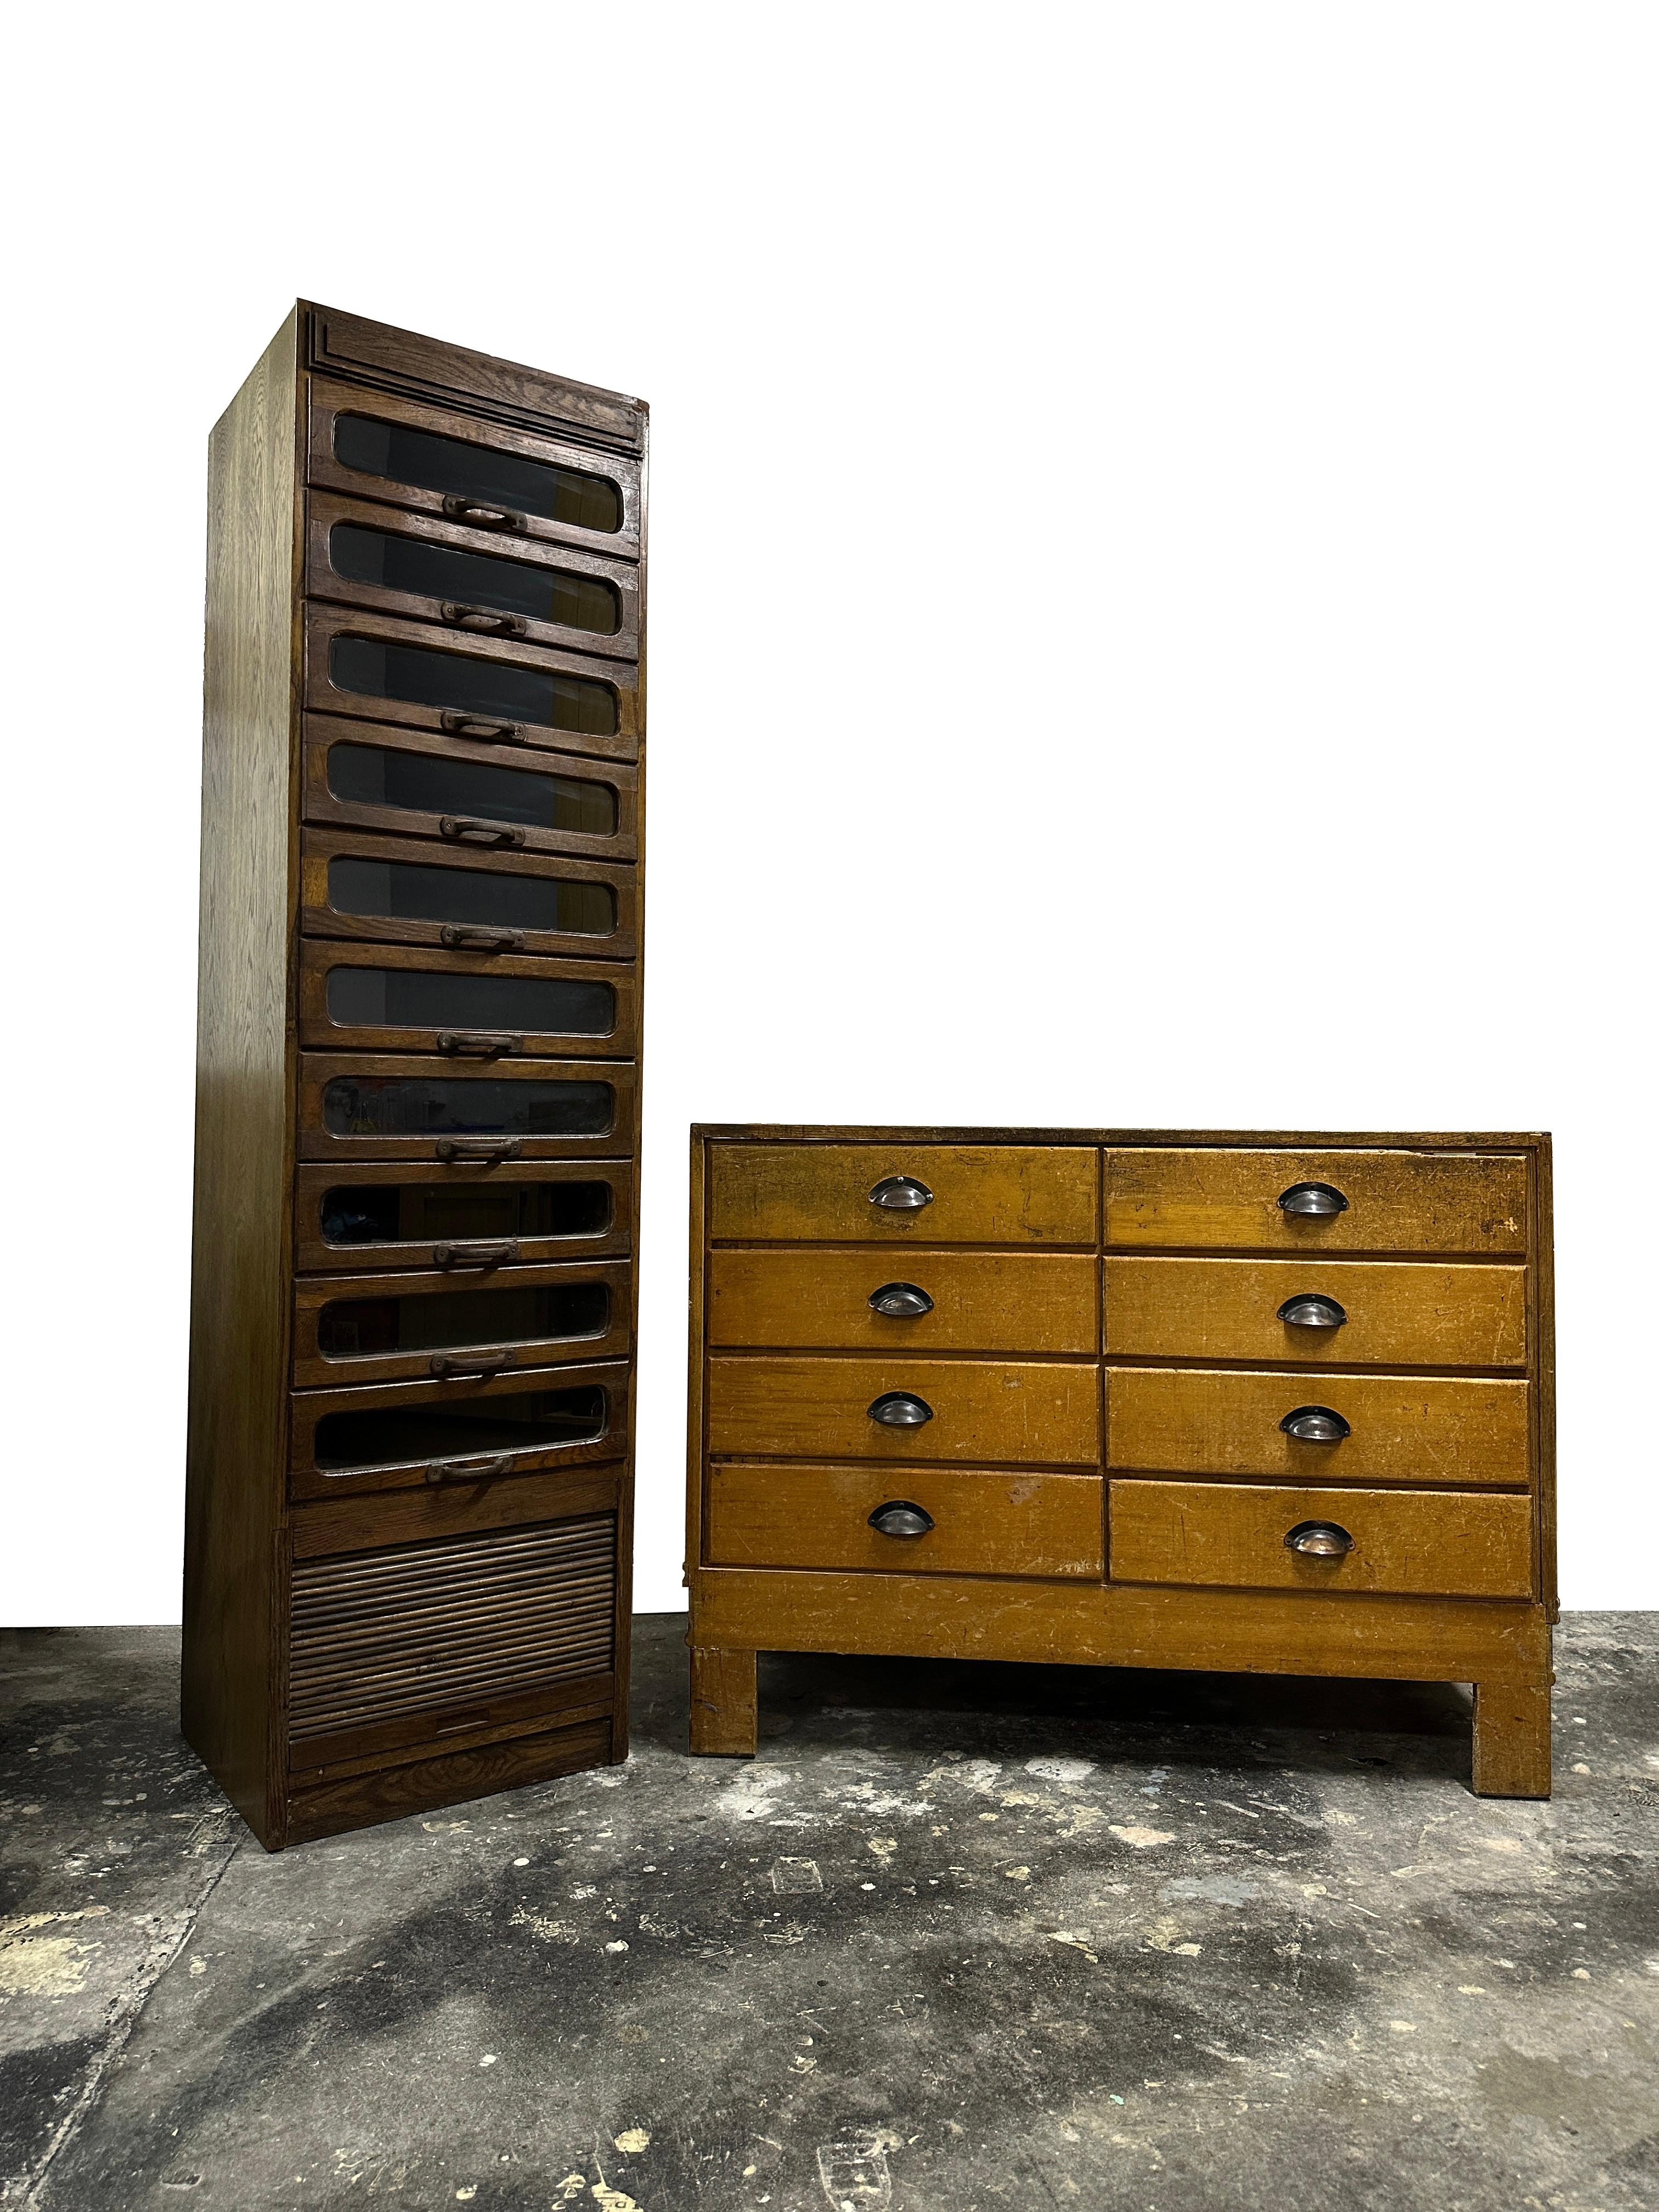 Antique Vintage Industrial Haberdashery Glass Display Cabinet Chest Of Drawers In Good Condition For Sale In Sale, GB